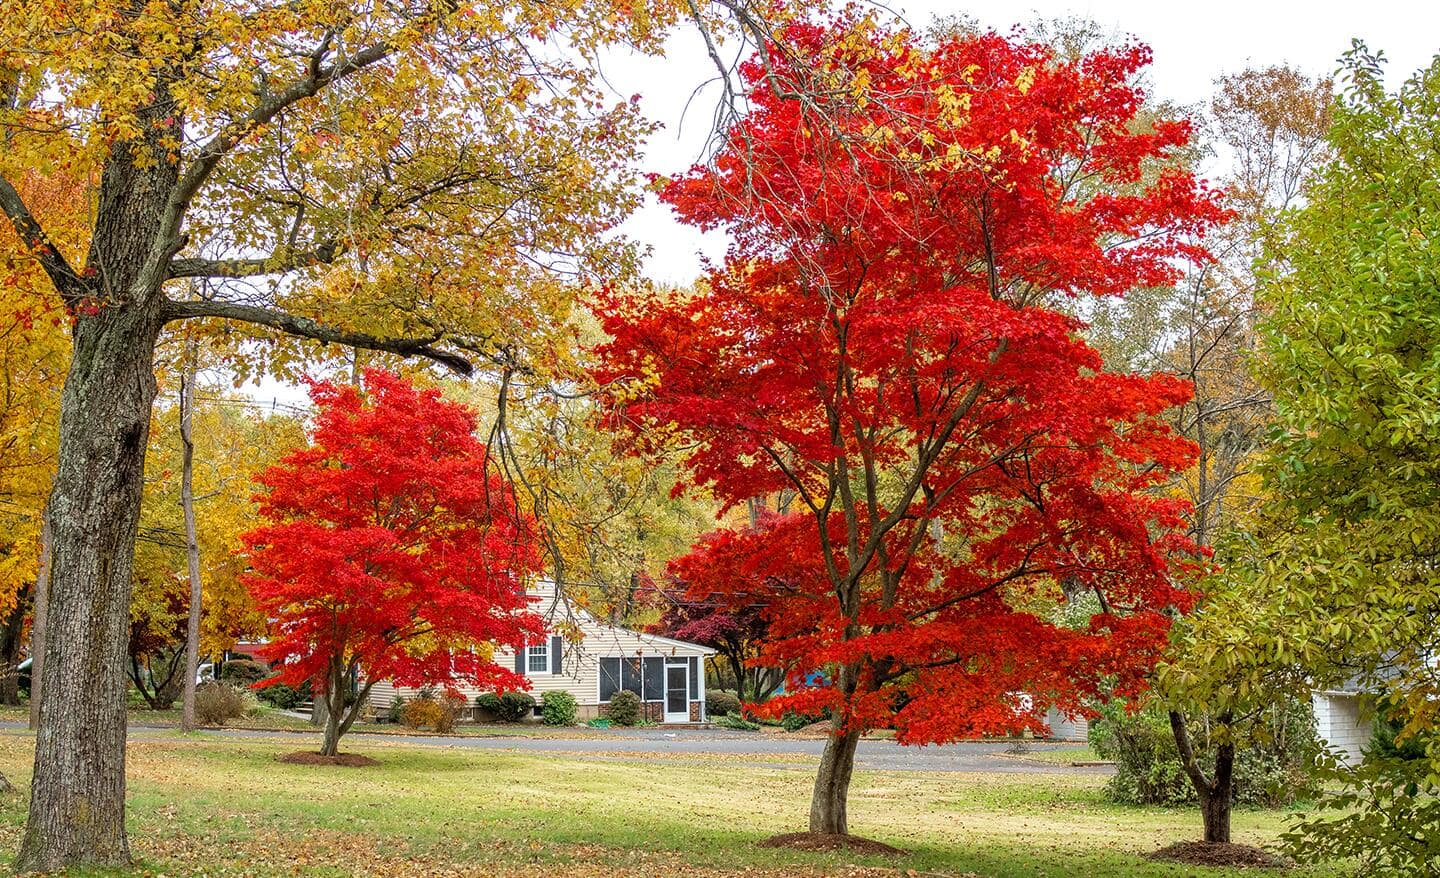 Two red shade trees in a yard